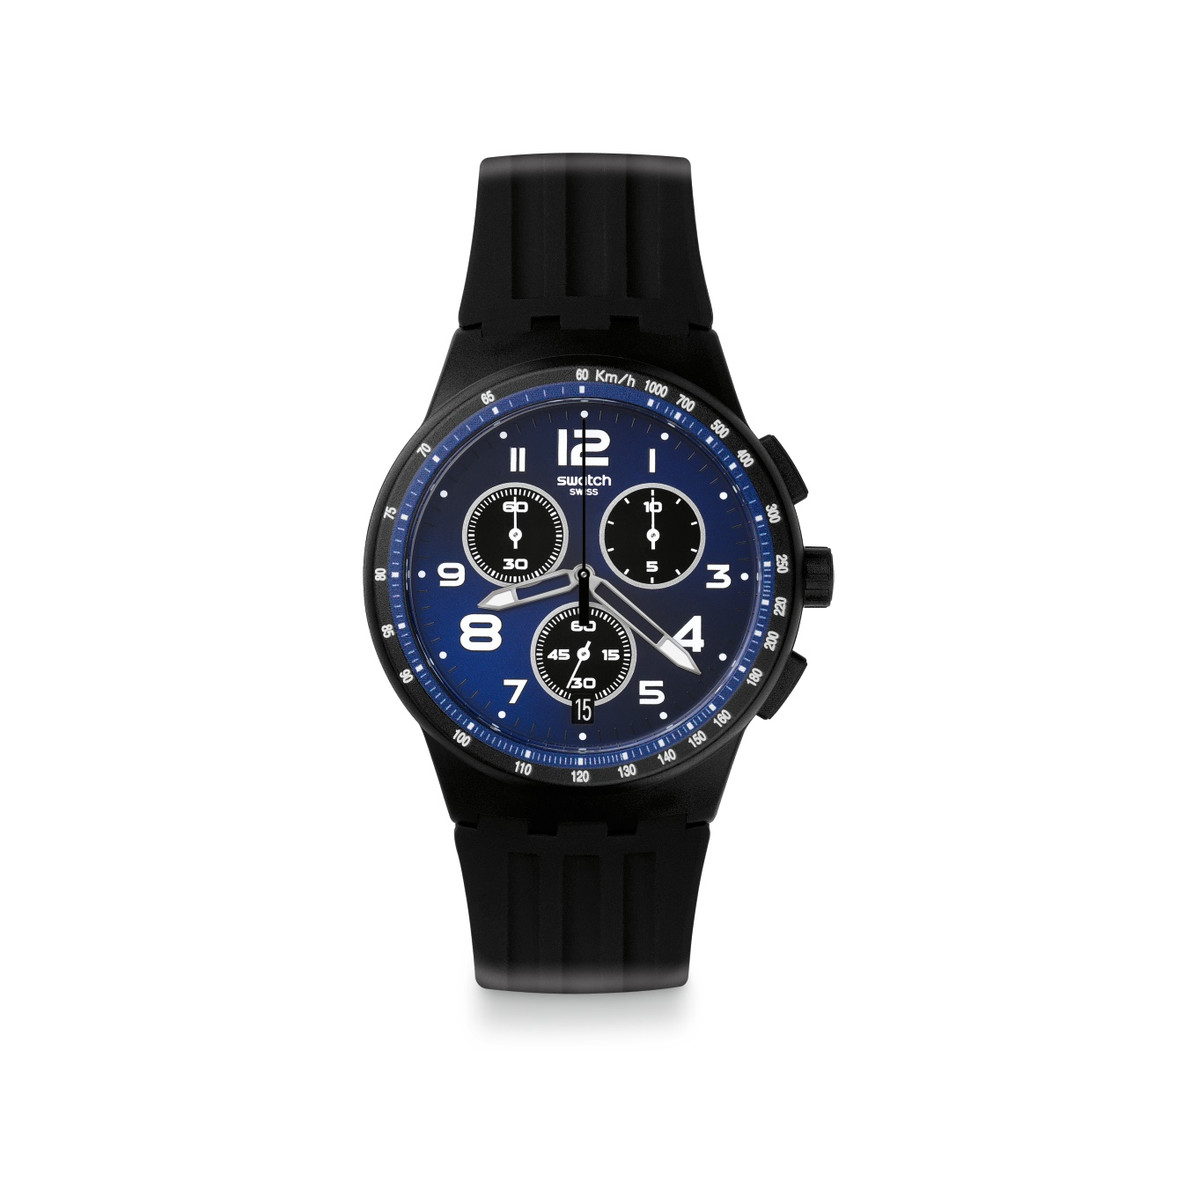 Montre Swatch homme chronographe silicone noir